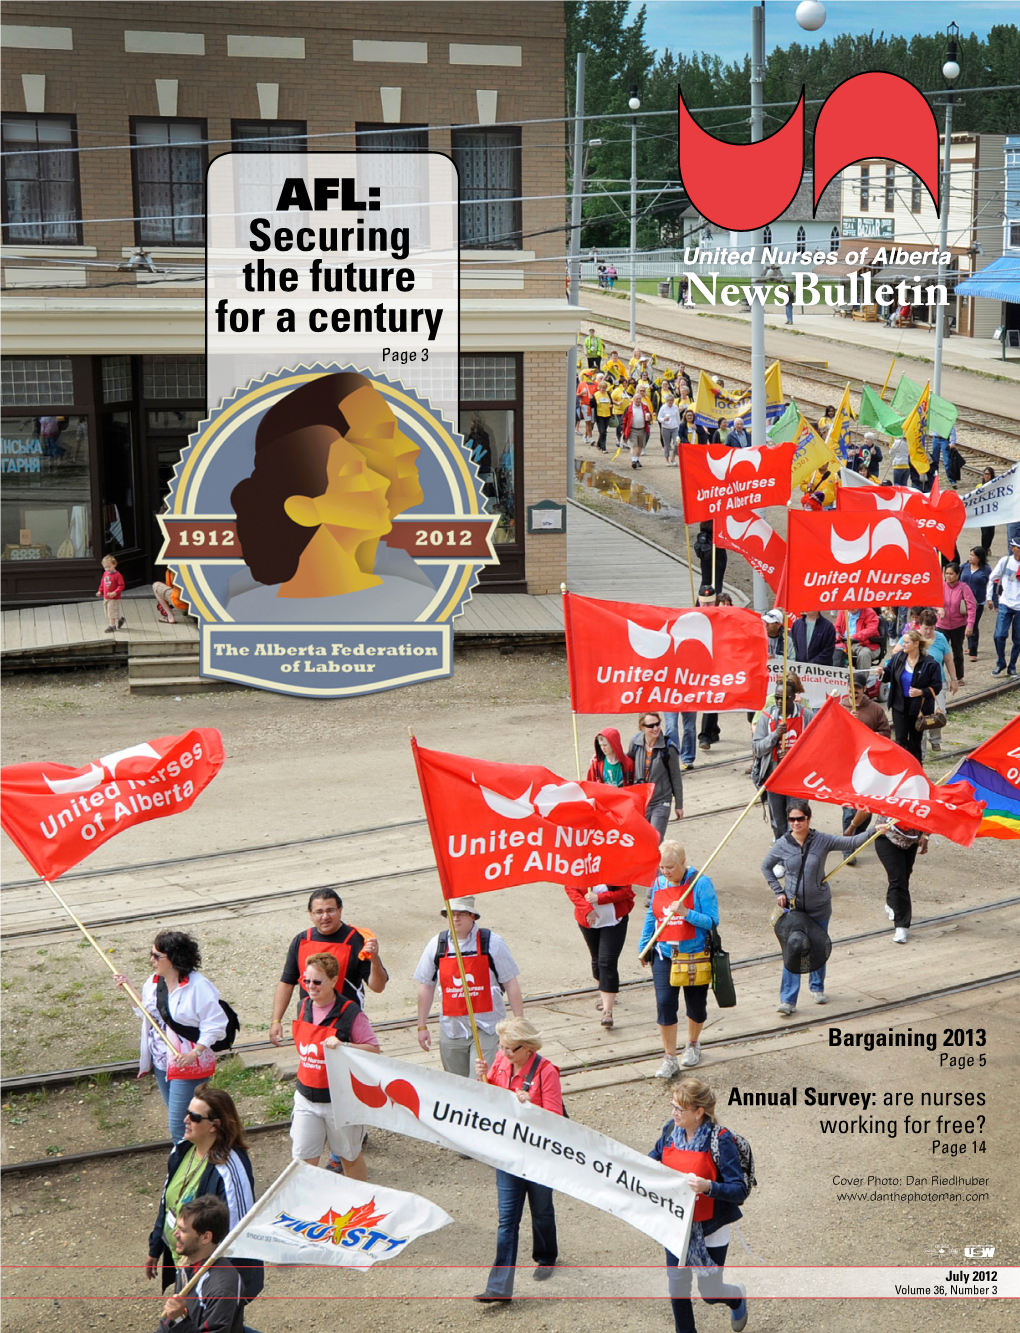 AFL: Securing the Future United Nurses of Alberta for a Century Newsbulletin Page 3